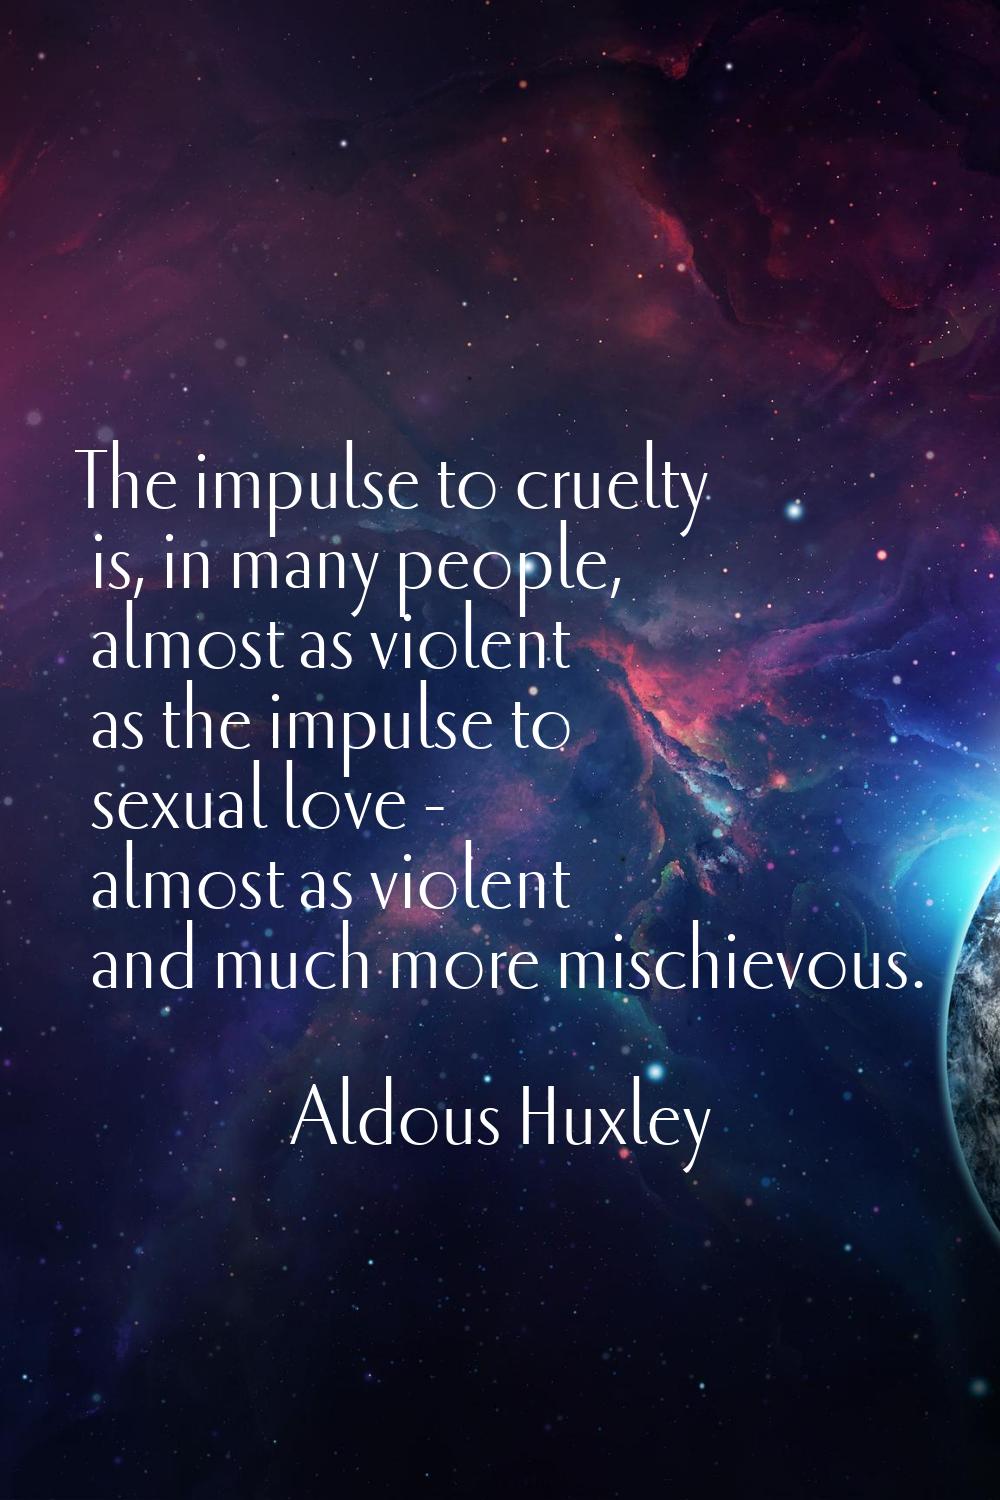 The impulse to cruelty is, in many people, almost as violent as the impulse to sexual love - almost